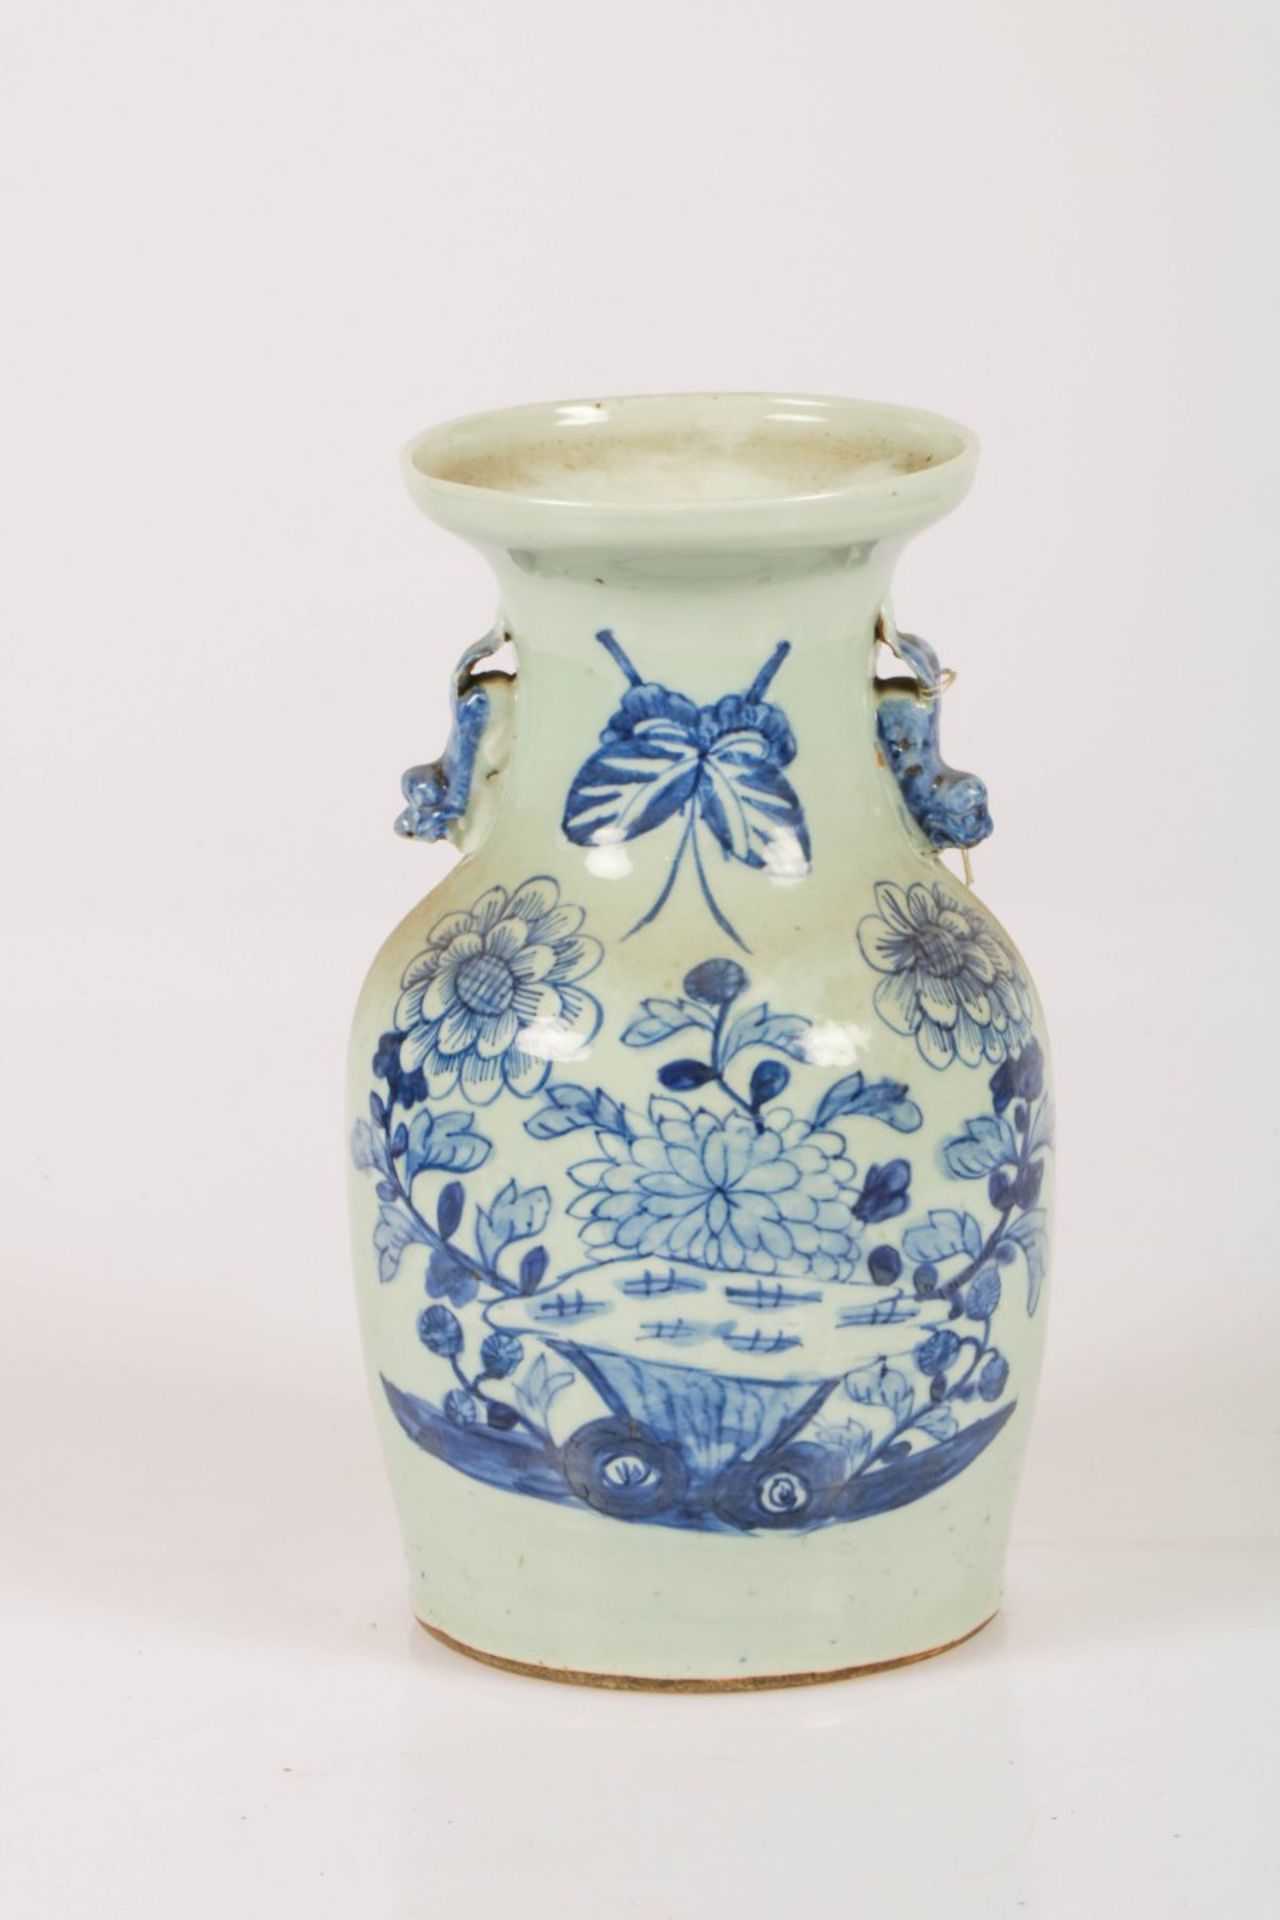 A porcelain vase with floral decor. China, late 19th century.